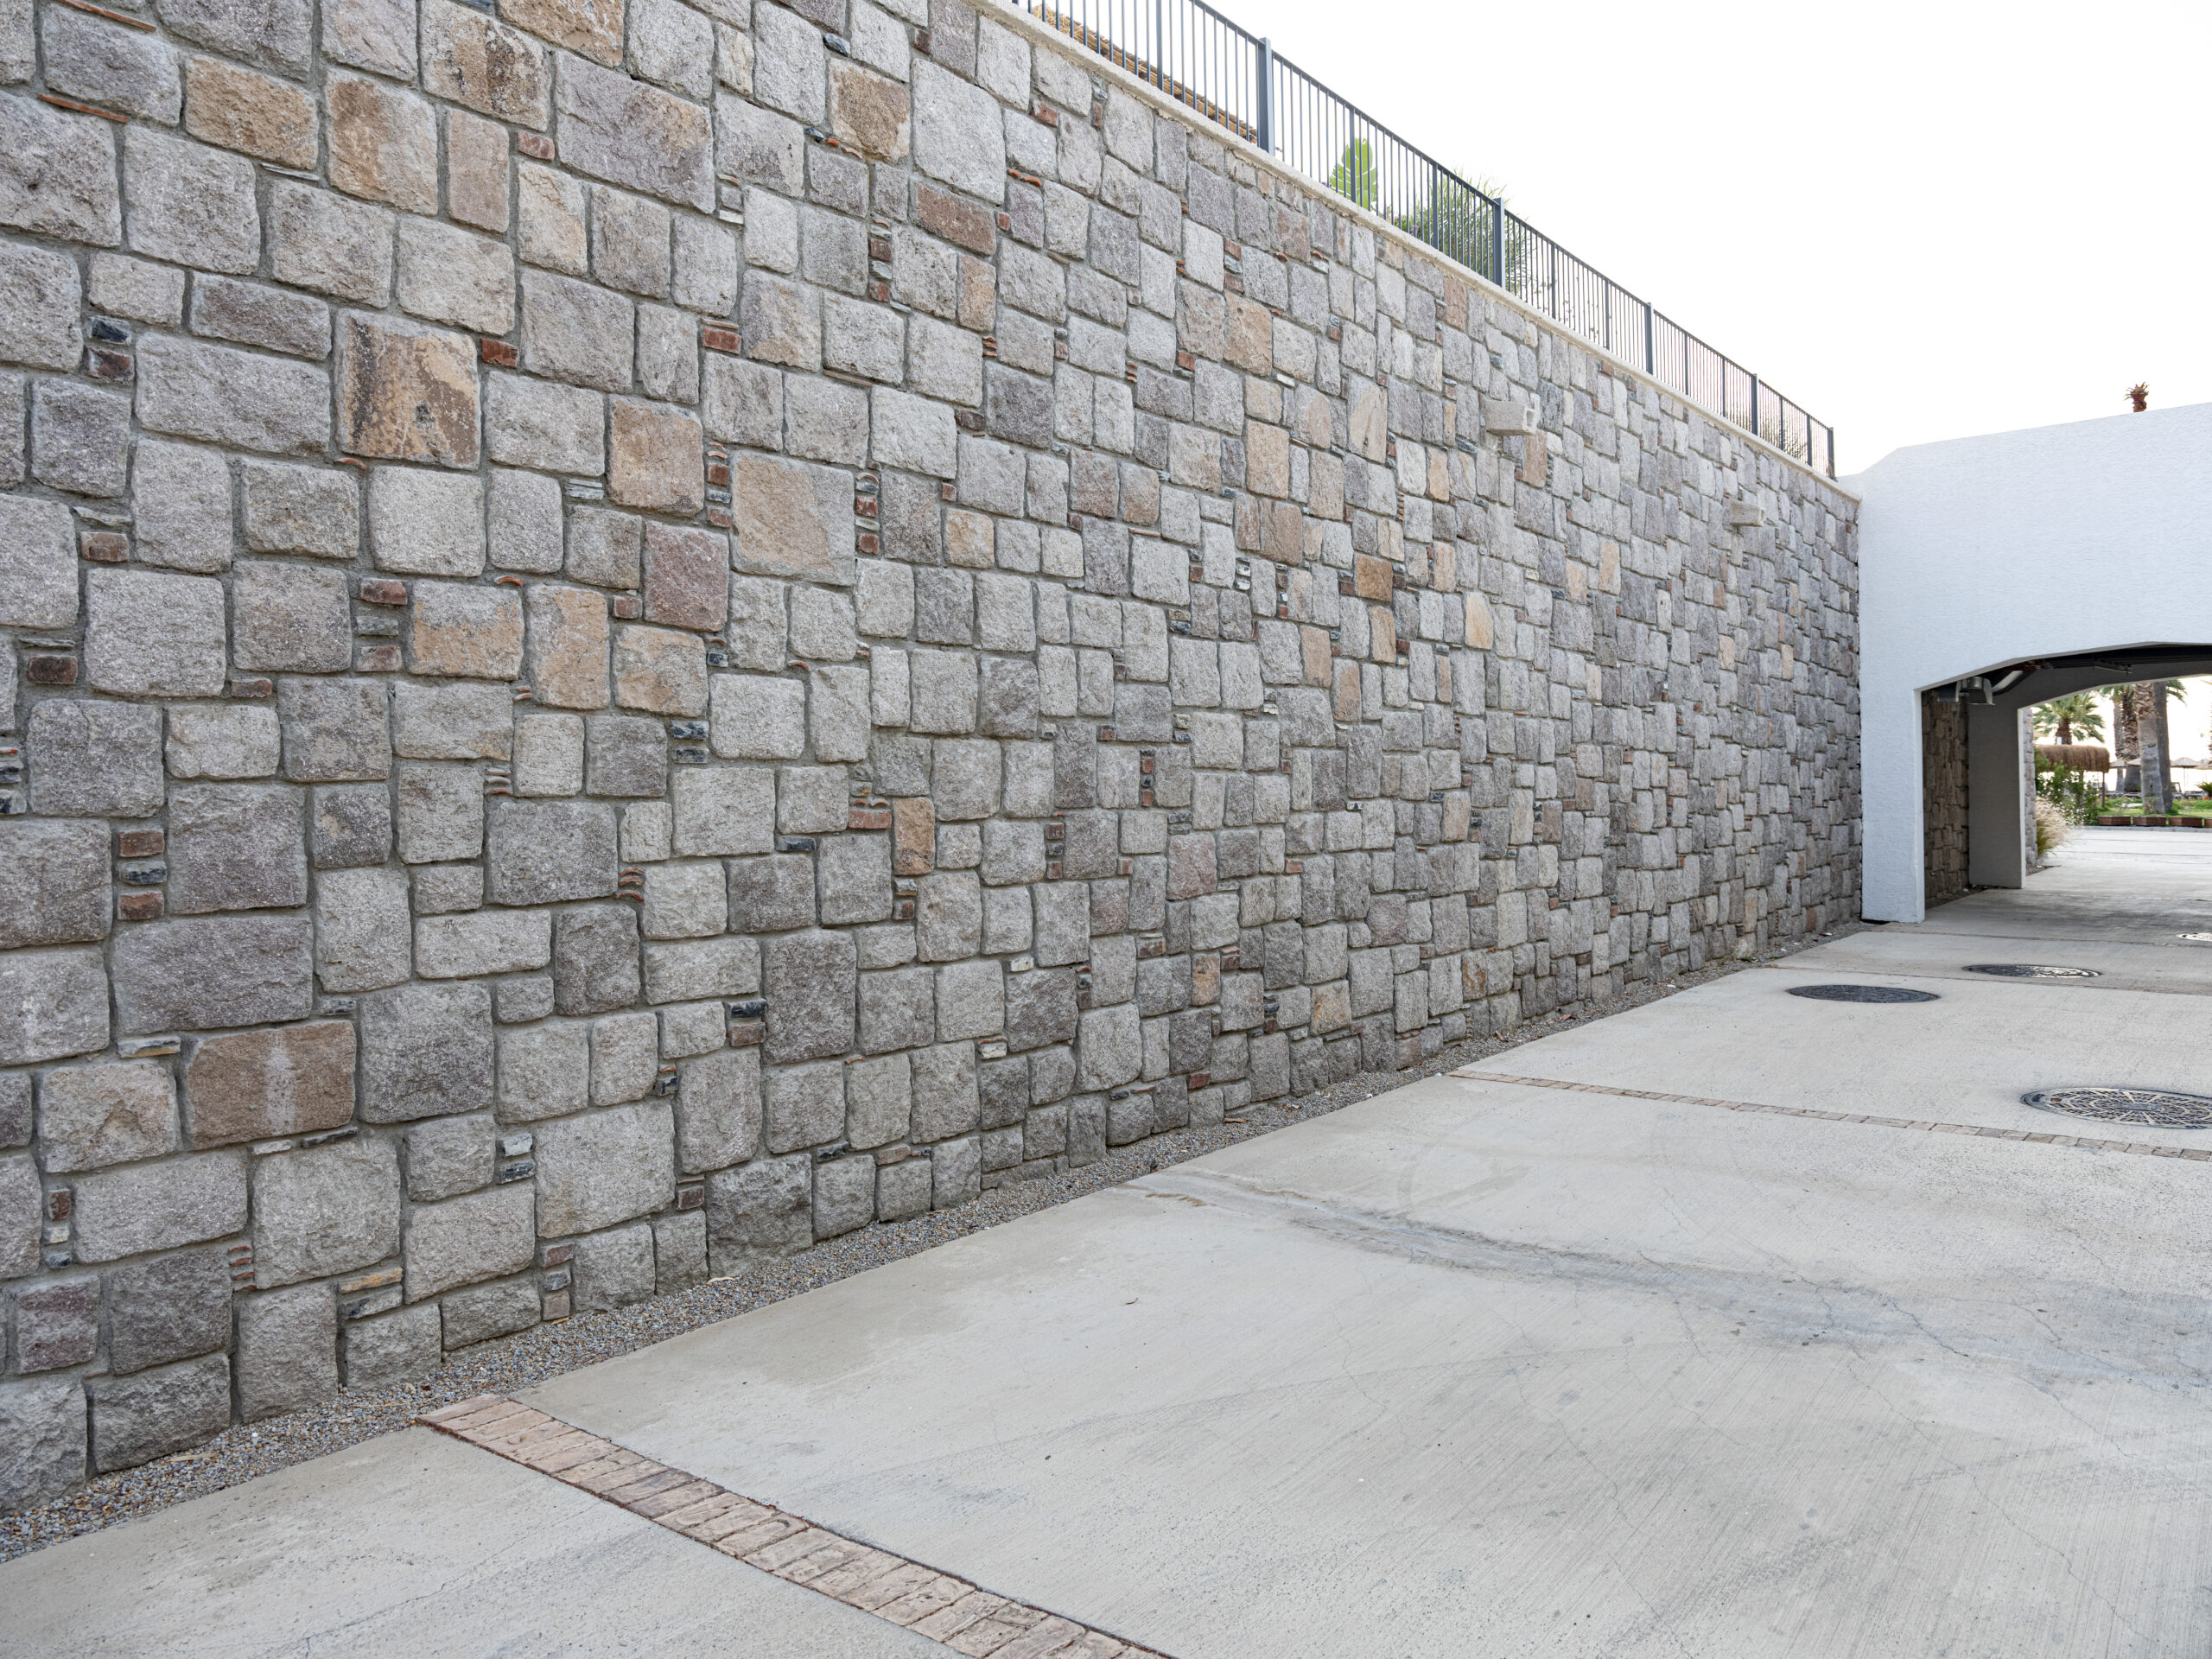 Textured stone wall with varied brick sizes on a sidewalk leading to an archway, showcasing modern construction and urban design.